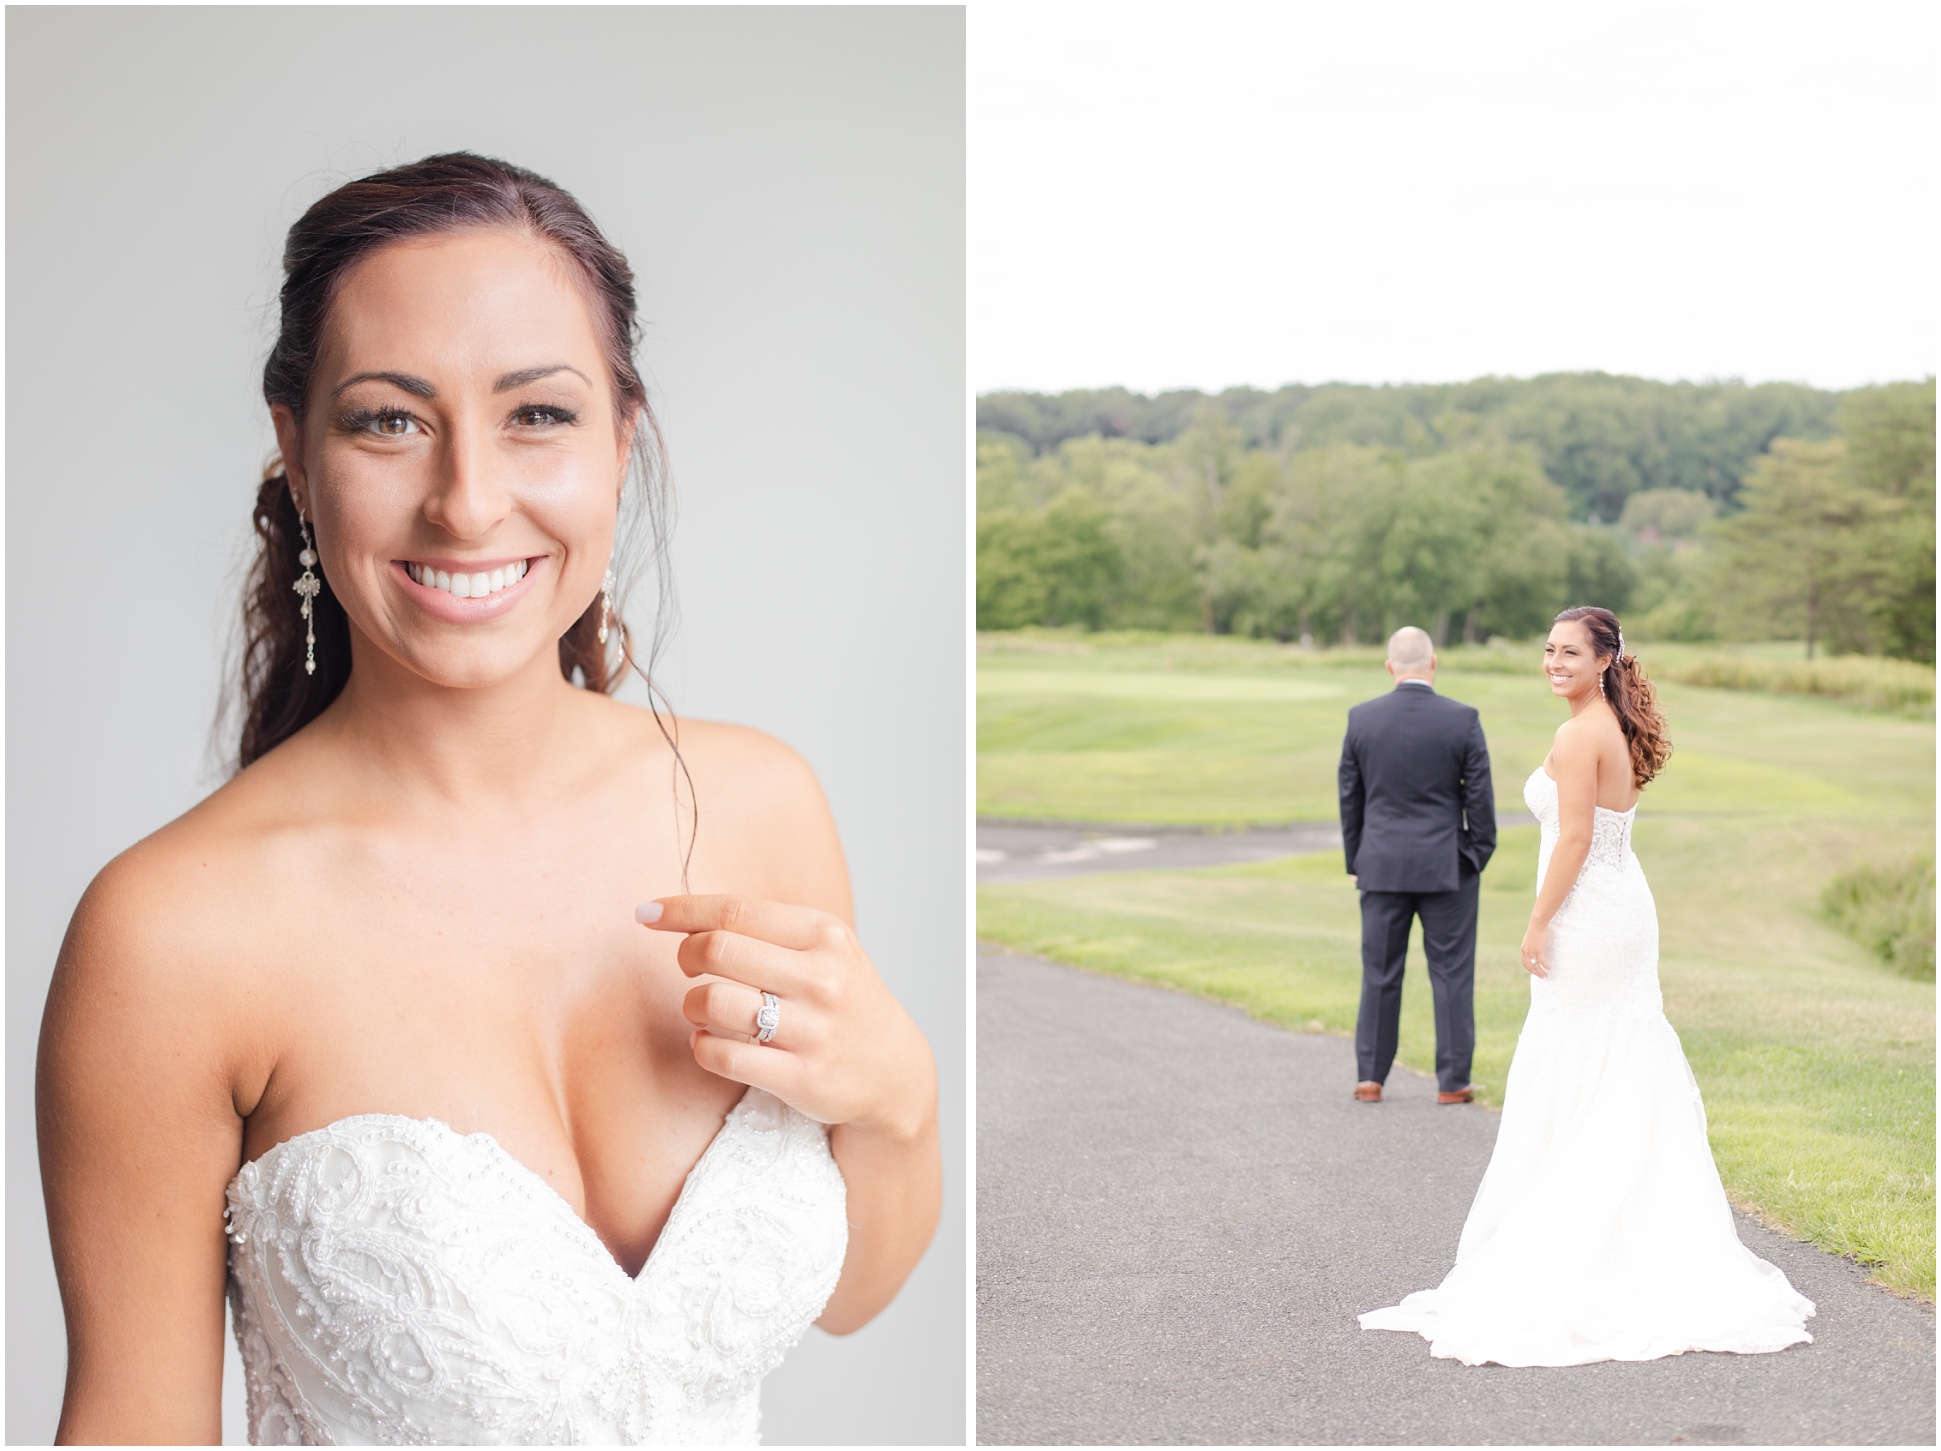 Left: Bride, Right: The first look